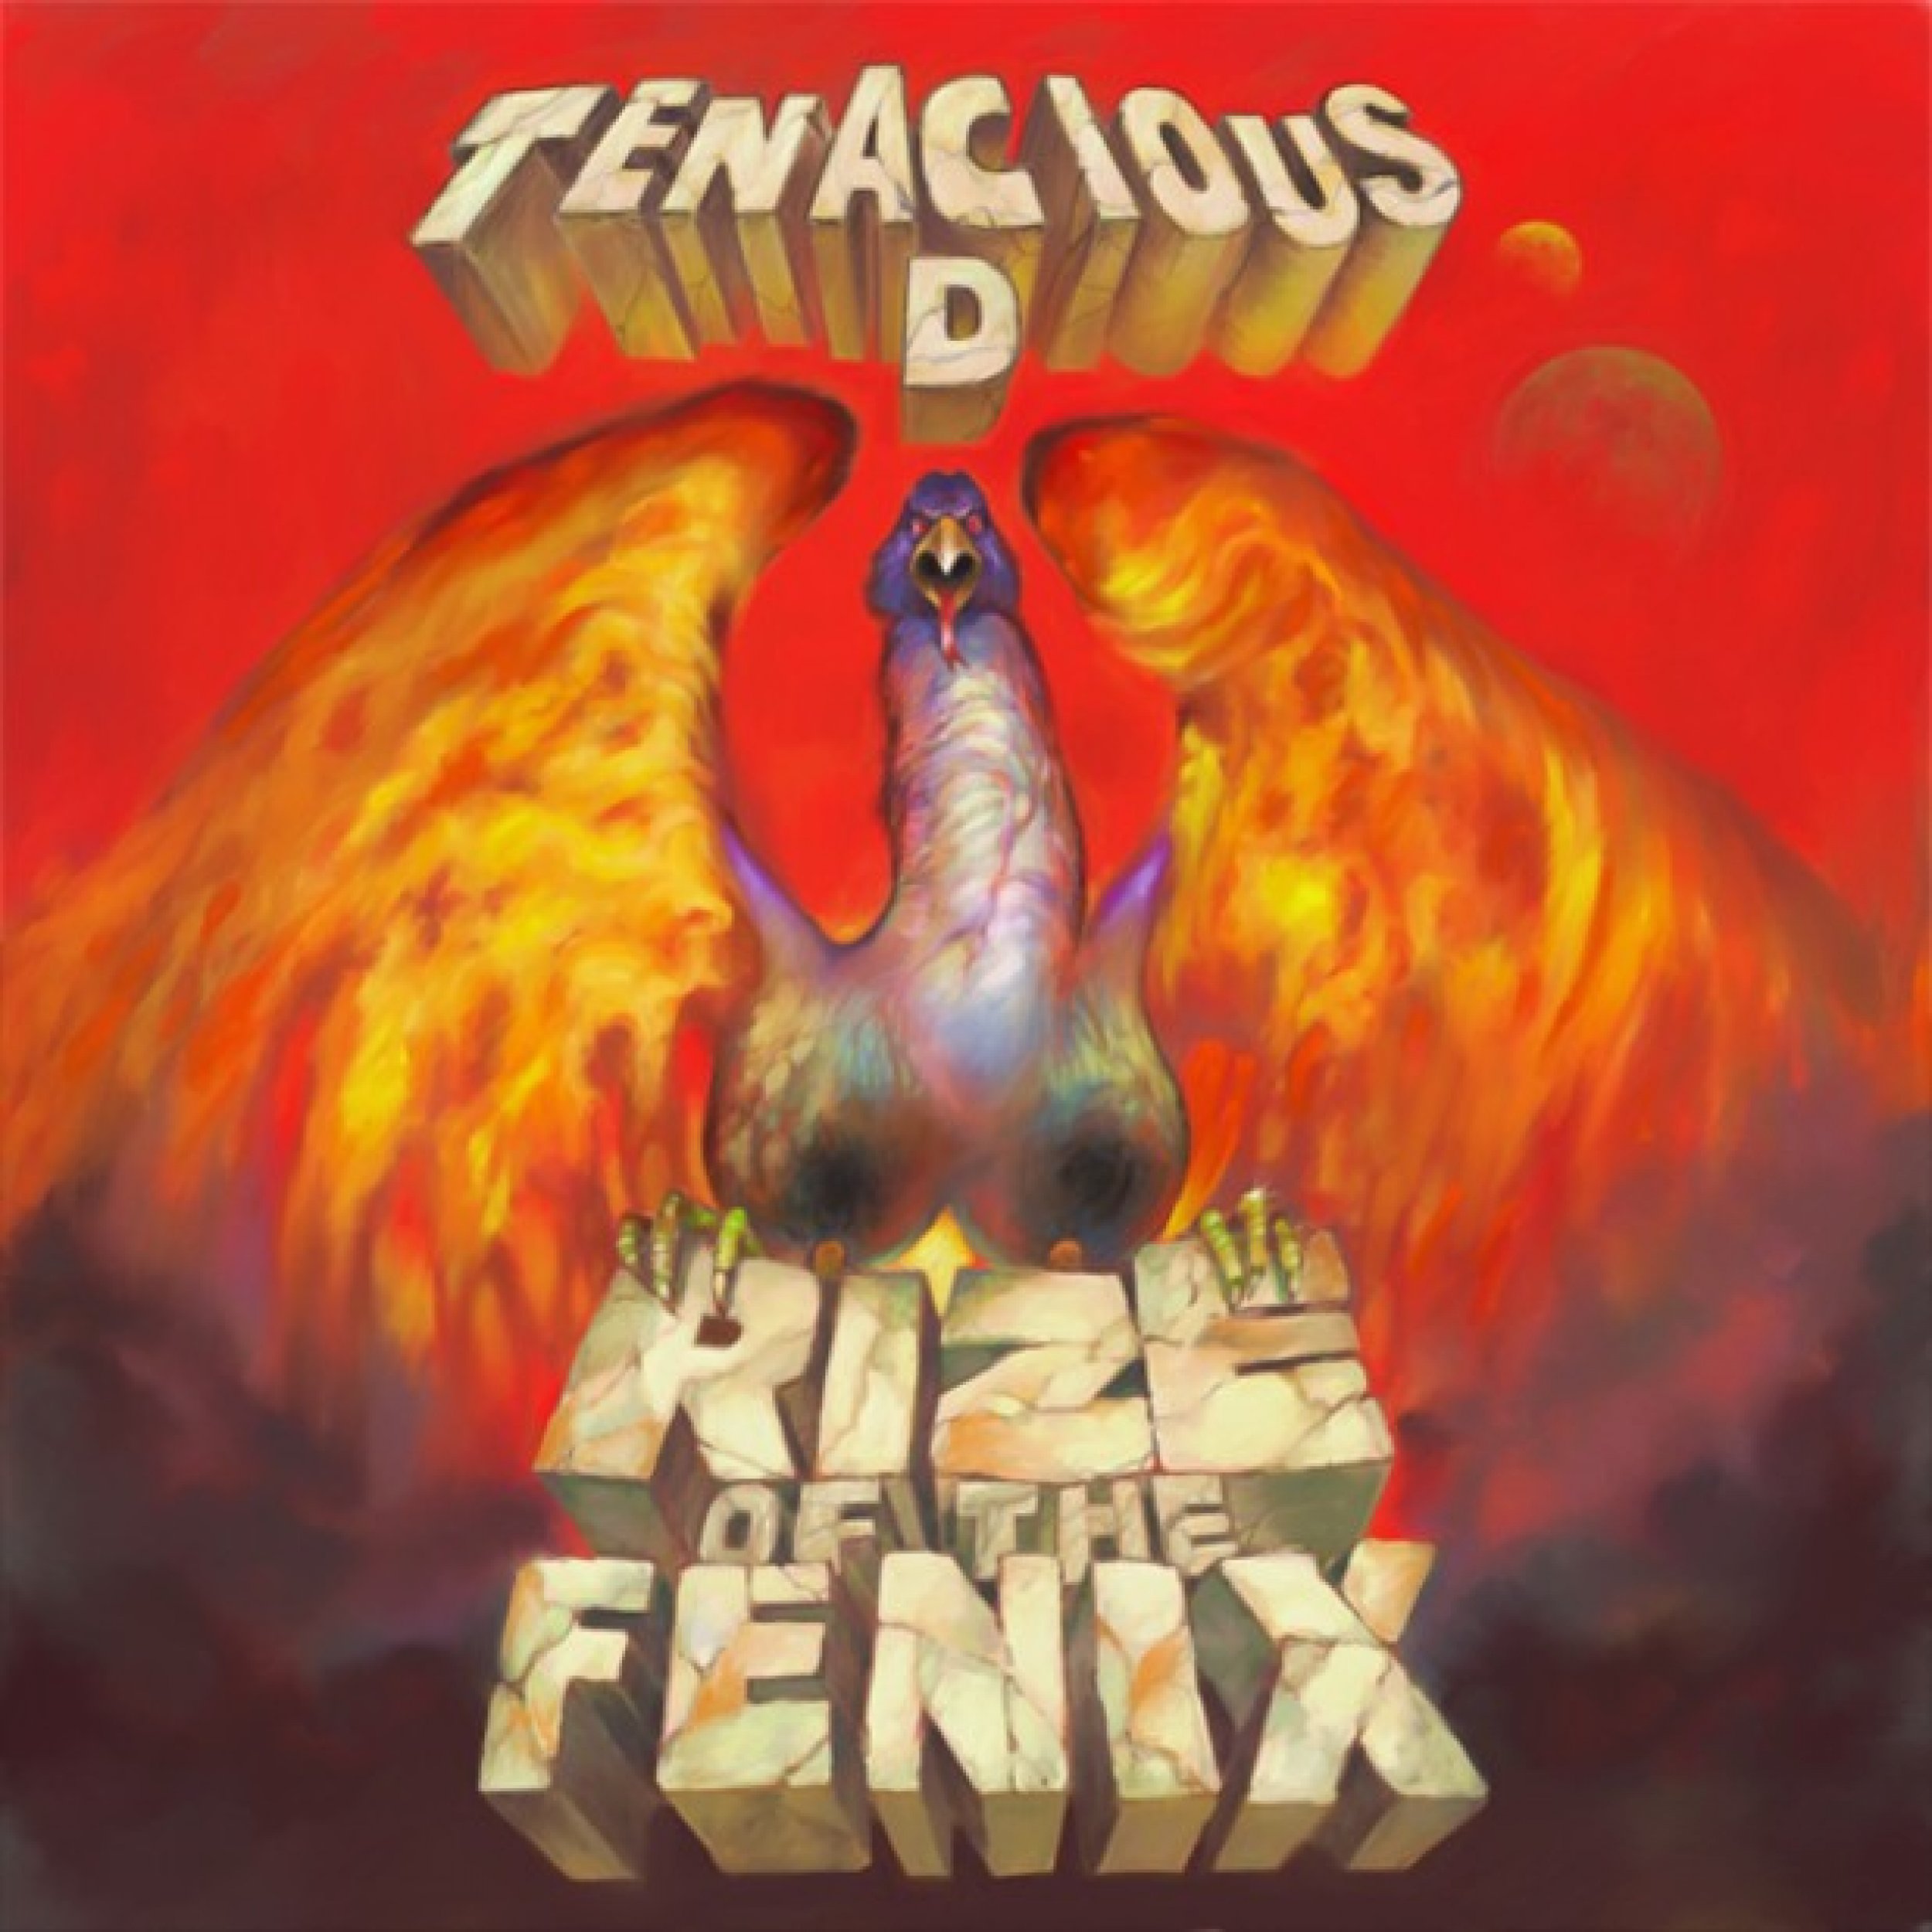 Tenacious D fans will have to wait 45 days until quotRize of the Fenixquot releases on May 15. If you think youre a real Tenacious D fan, youll follow these six steps to achieve Tenacious D Fandom Mastery.